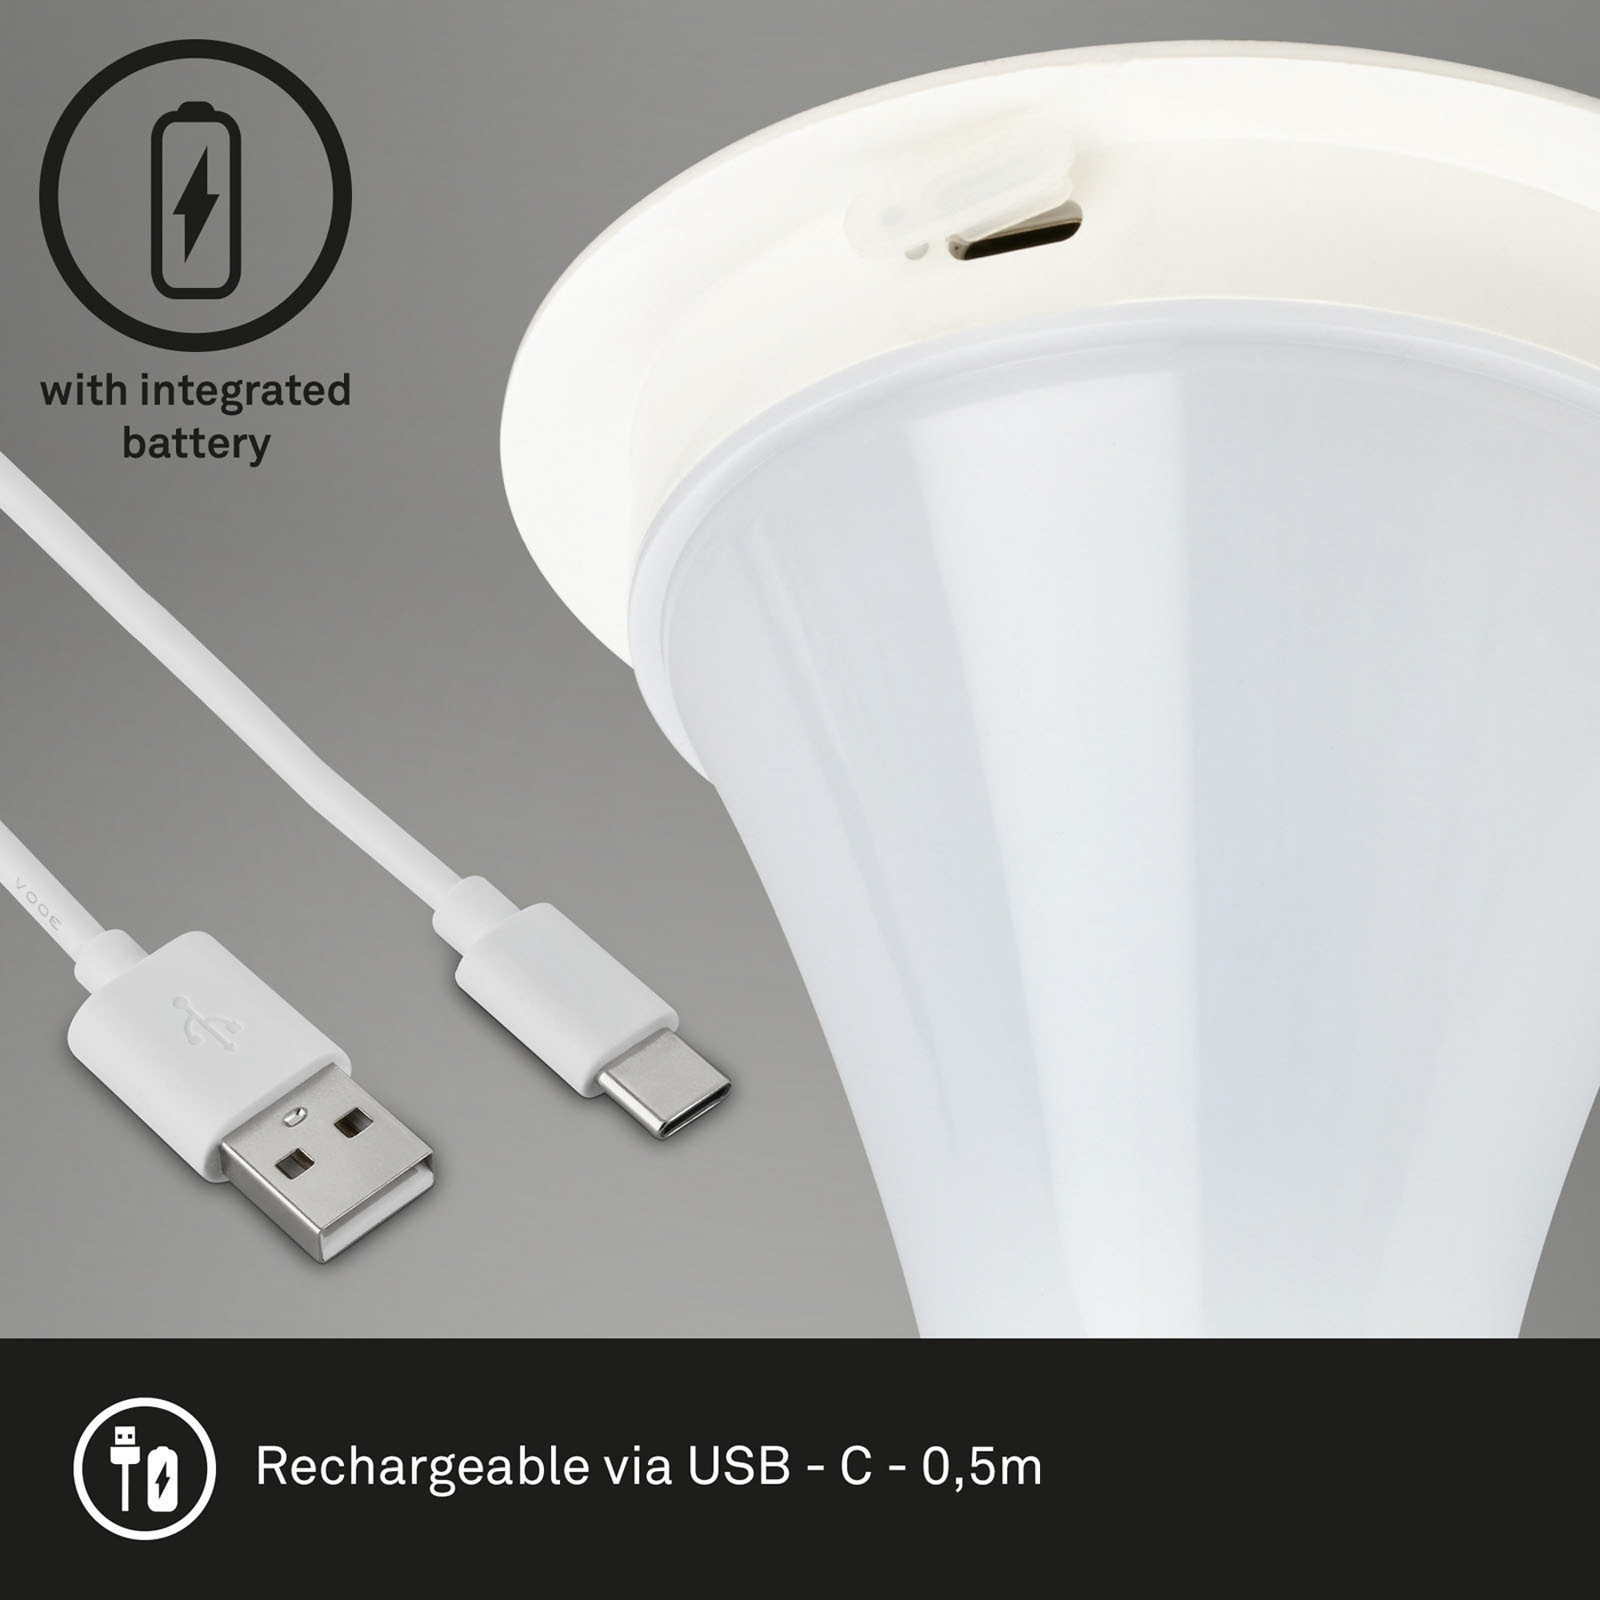 Halo LED table lamp, battery-powered, white